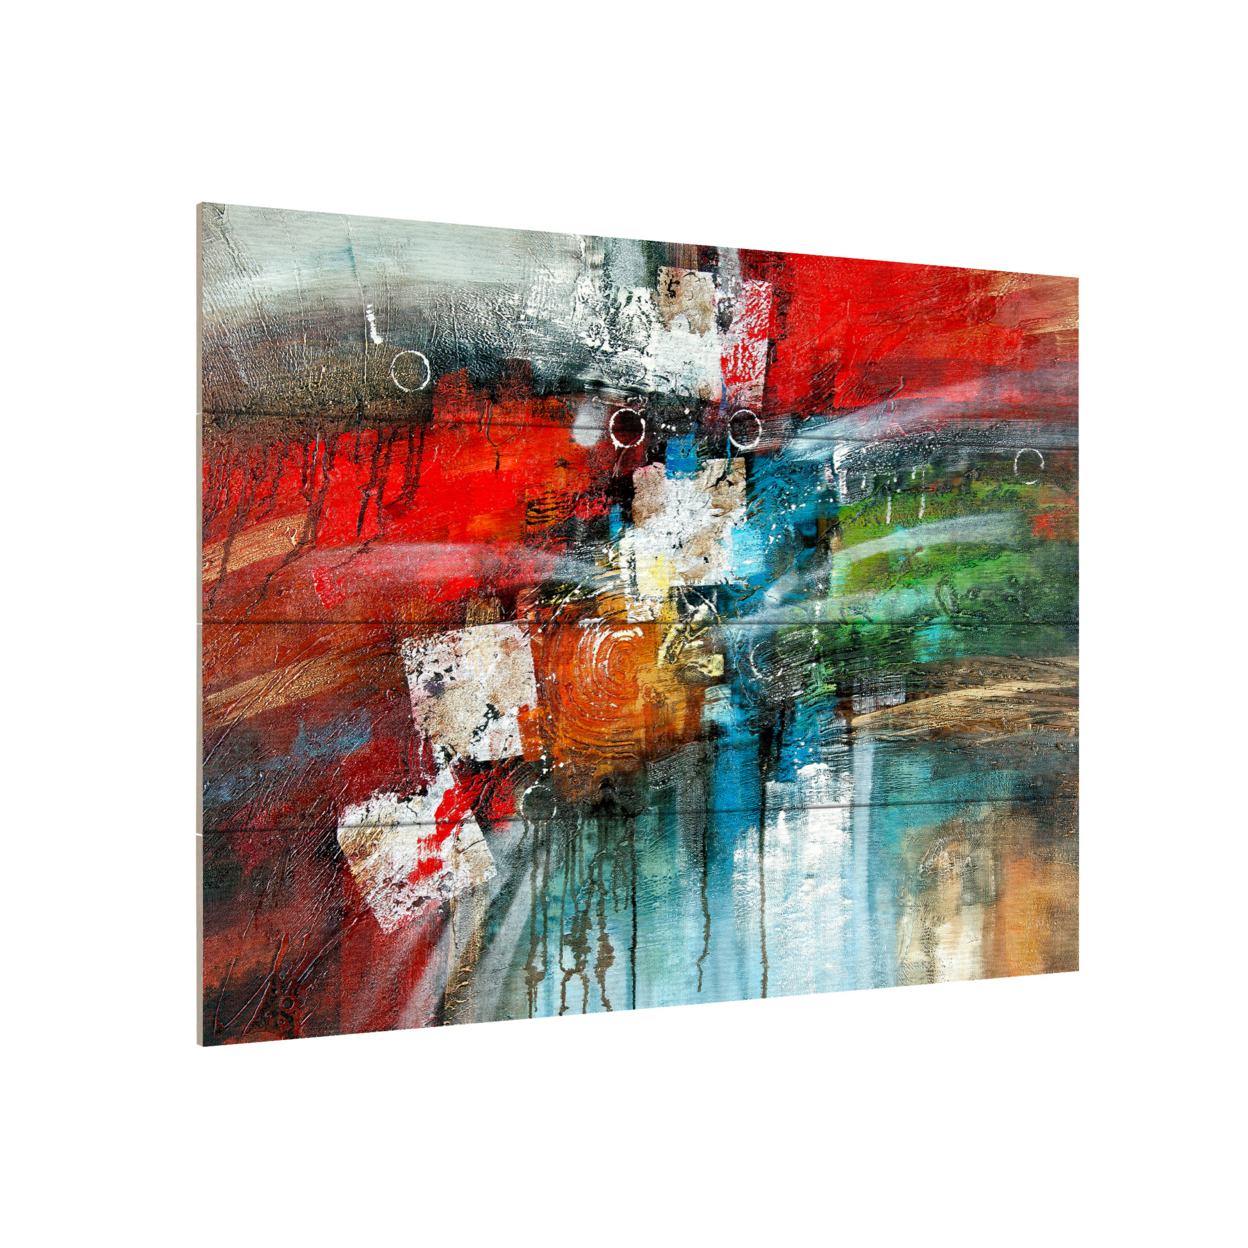 Wall Art 12 X 16 Inches Titled Cube Abstract IV Ready To Hang Printed On Wooden Planks